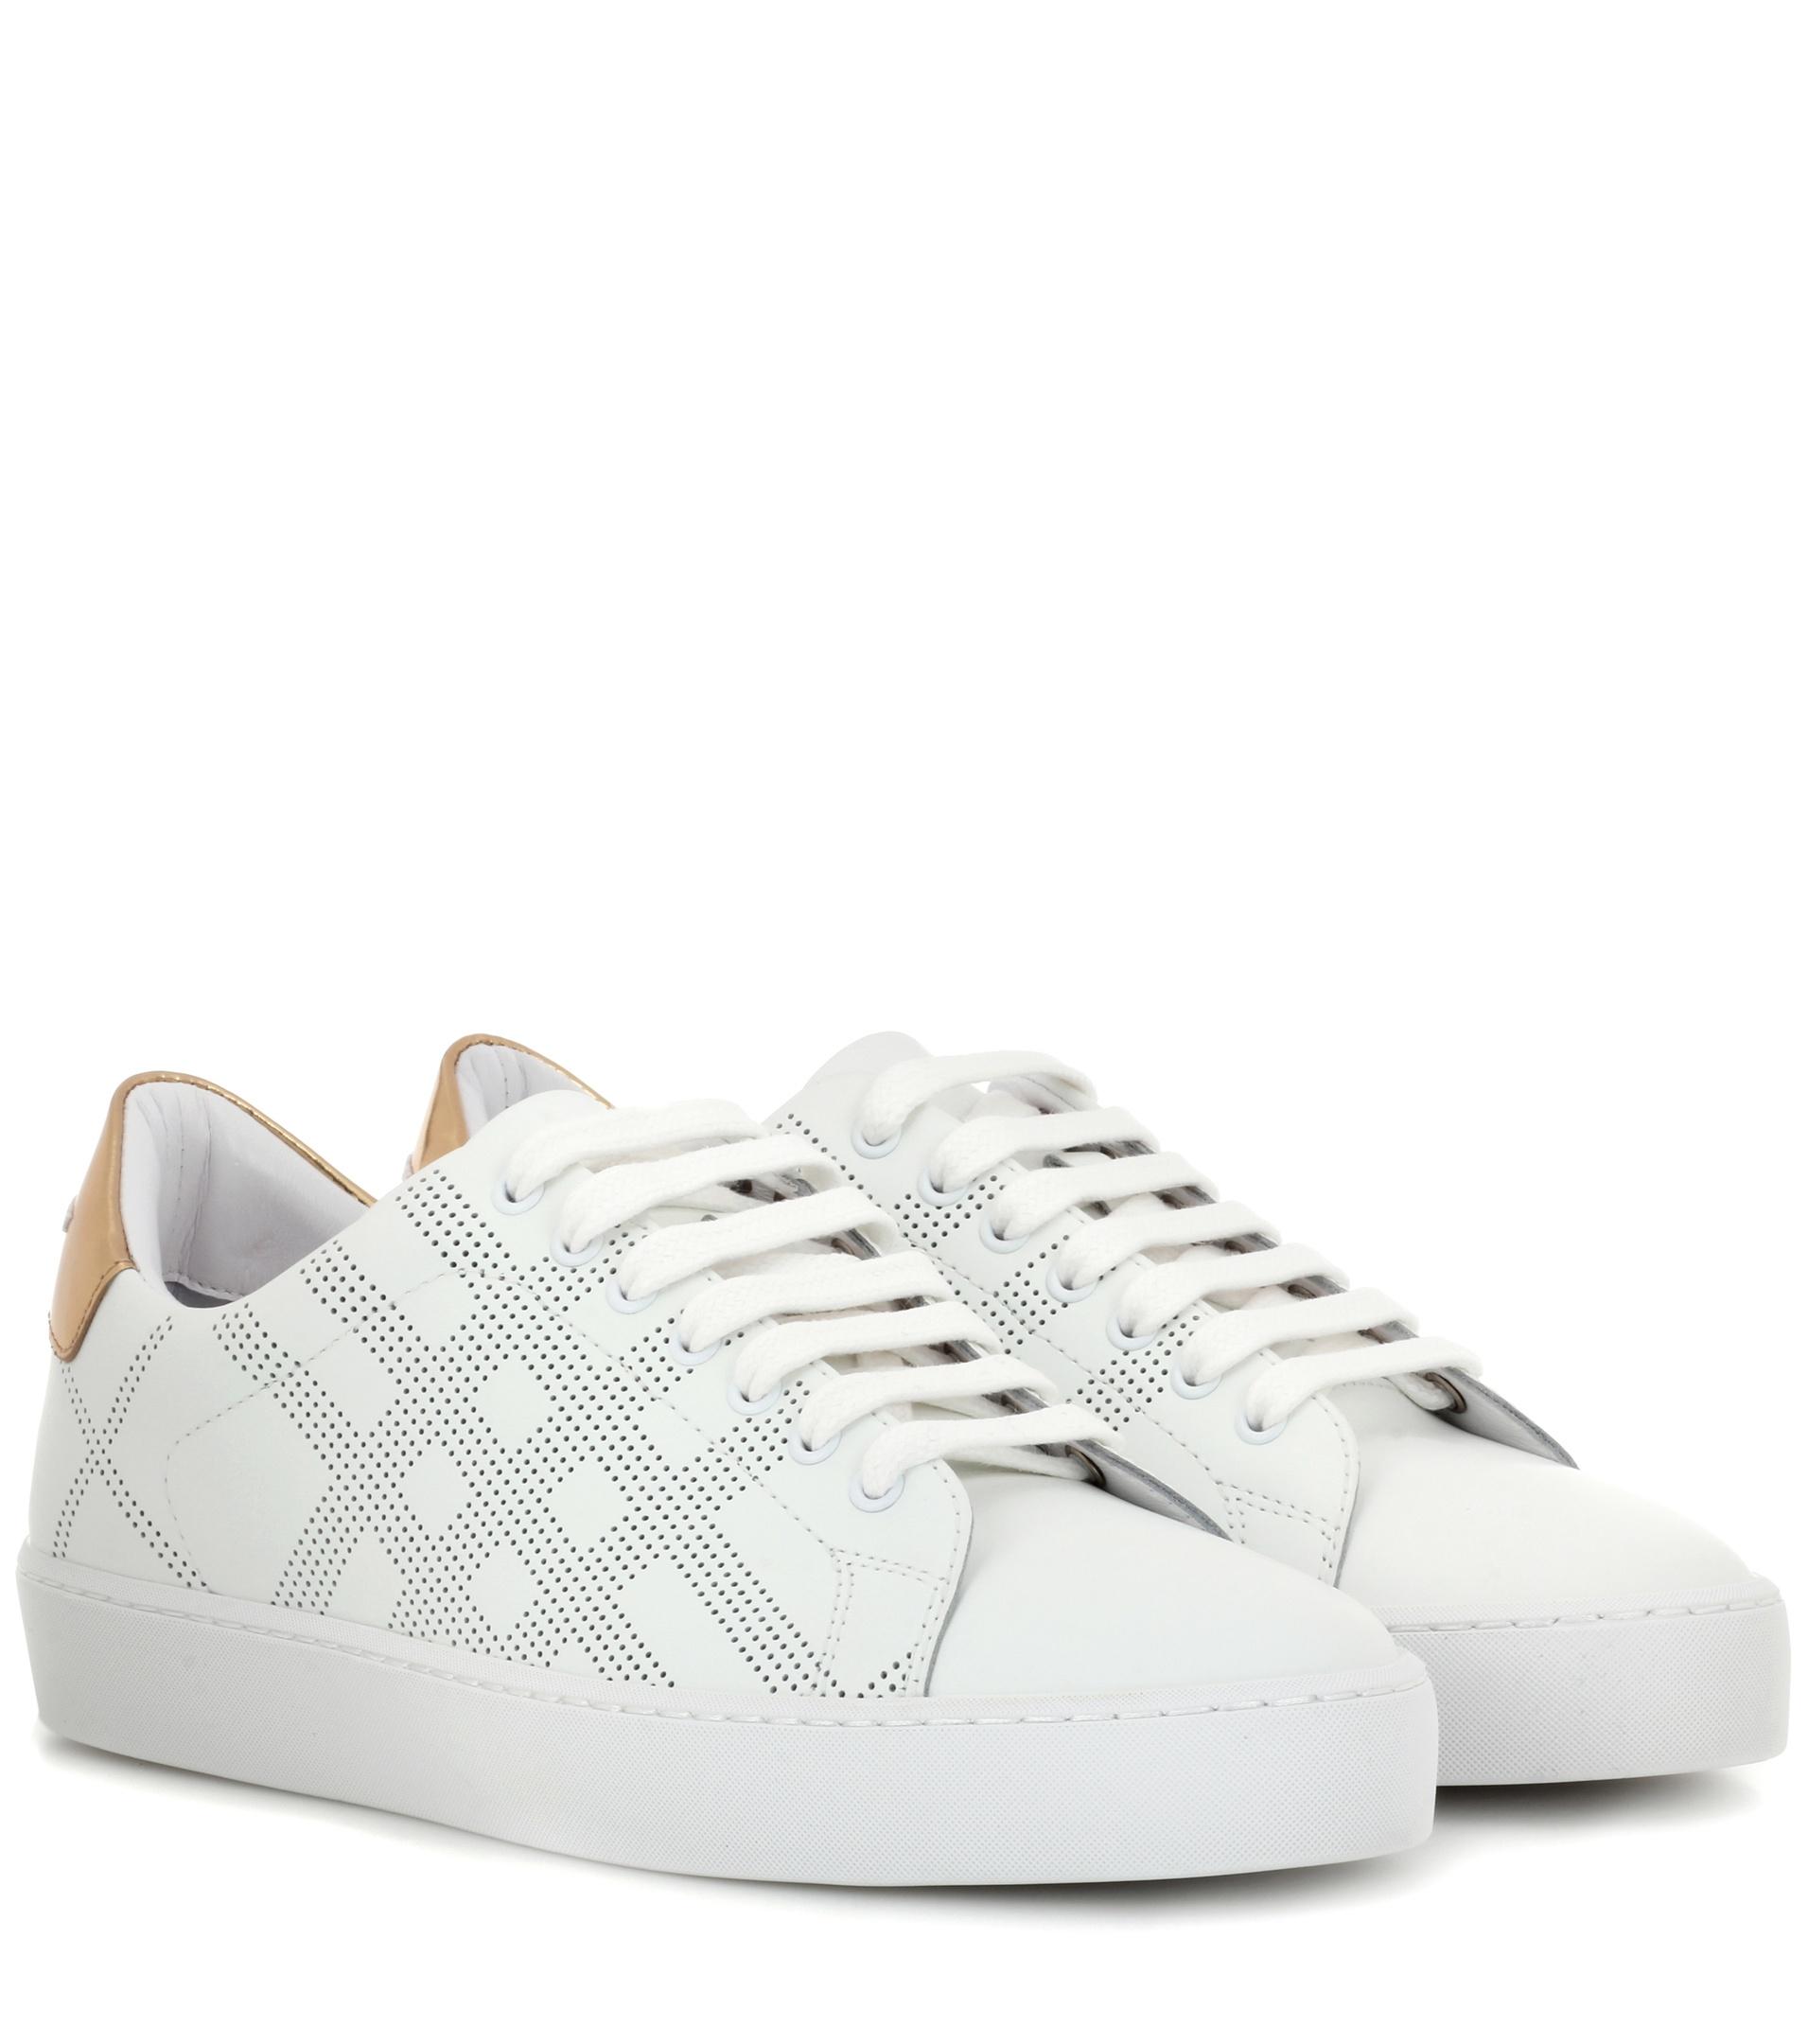 Burberry Westford Leather Sneakers in White - Lyst